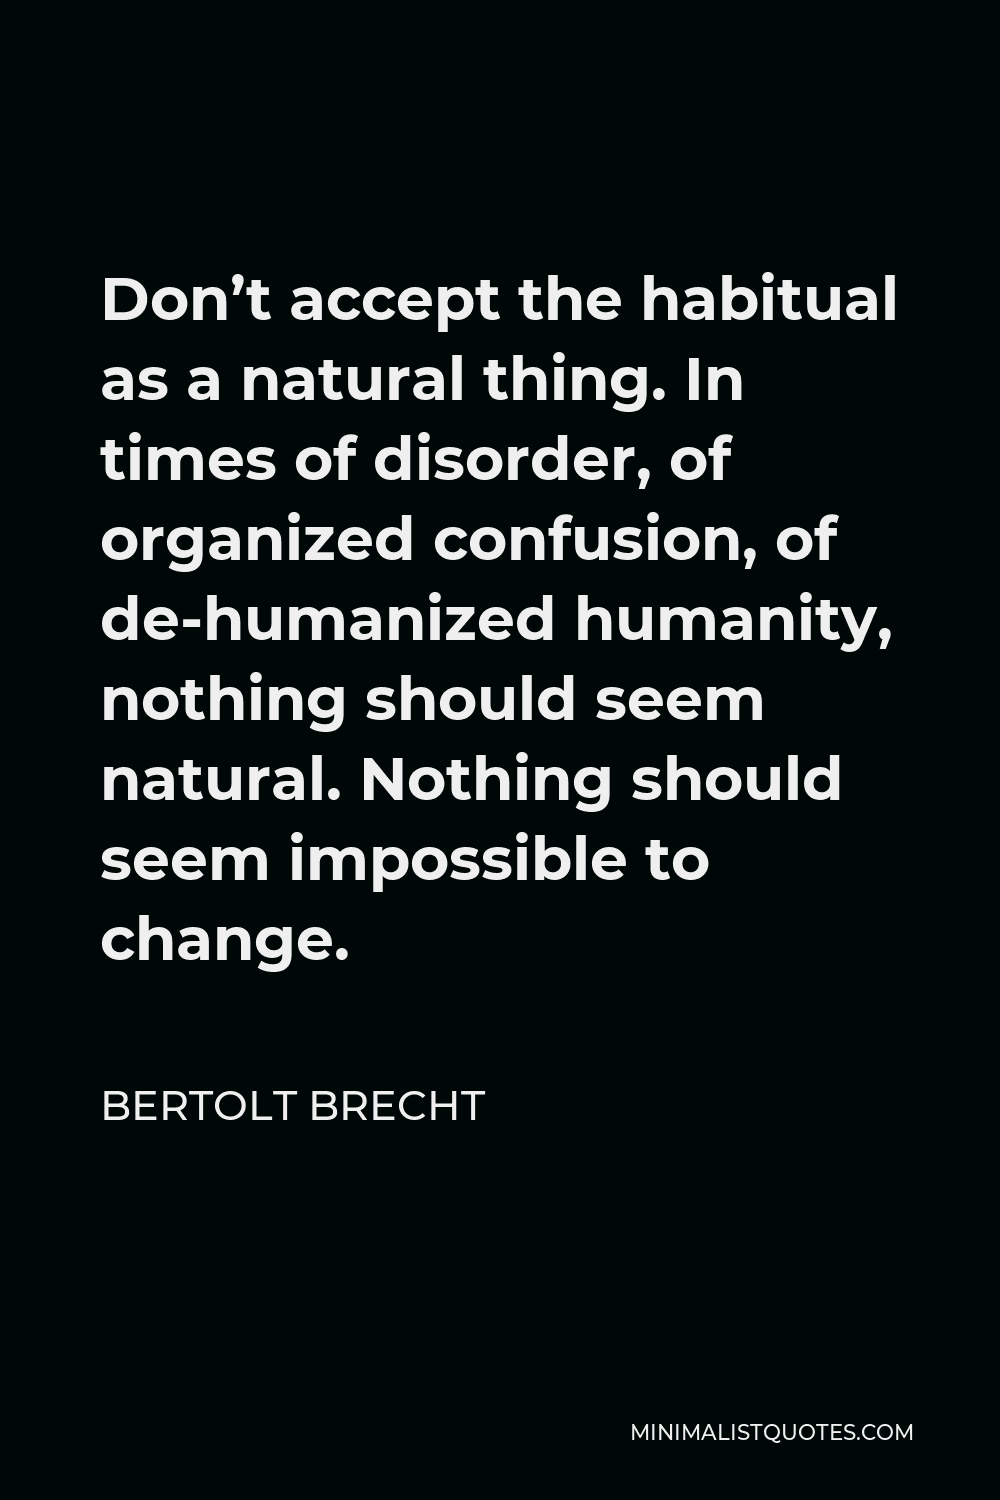 Bertolt Brecht Quote - Don’t accept the habitual as a natural thing. In times of disorder, of organized confusion, of de-humanized humanity, nothing should seem natural. Nothing should seem impossible to change.